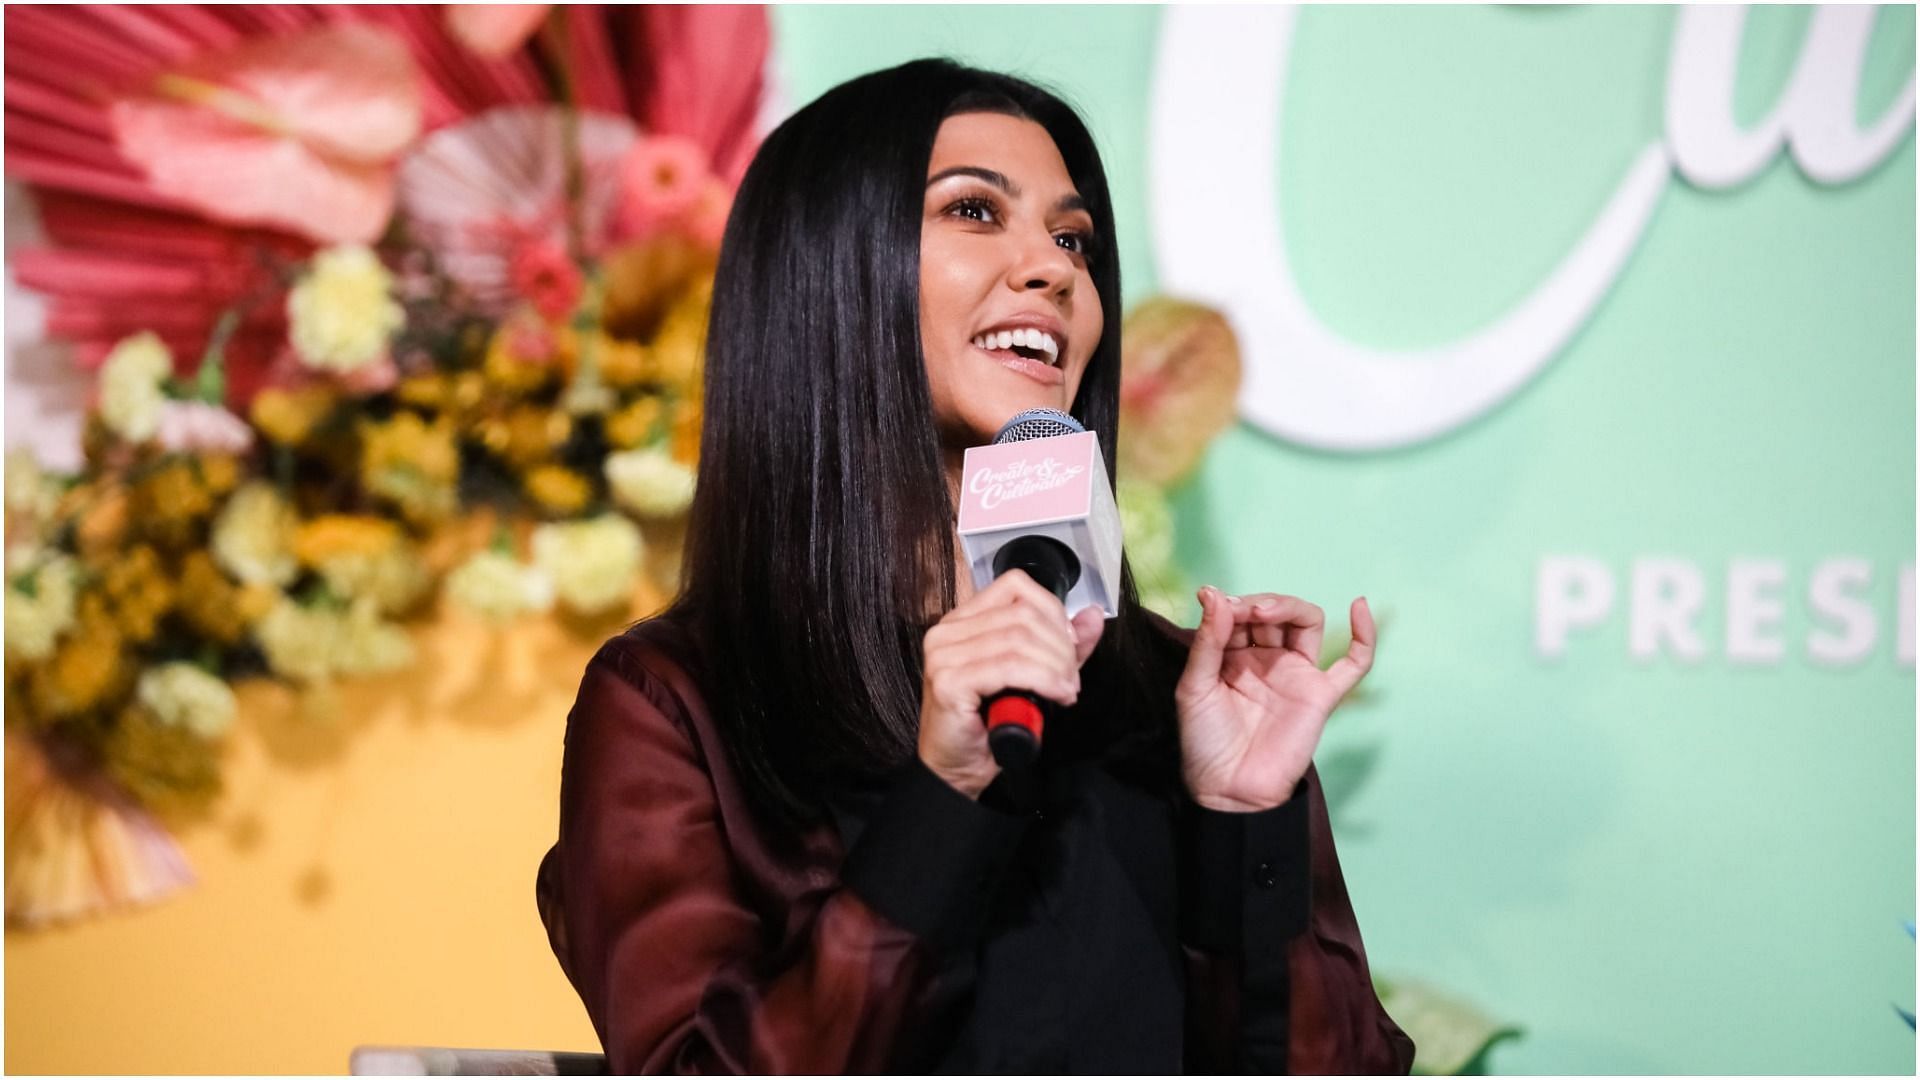 CEO and founder of Poosh, Kourtney Kardashian, speaks onstage at the Create &amp; Cultivate Conference at SVN West on September 21, 2019, in San Francisco, California (Image via Getty Images)